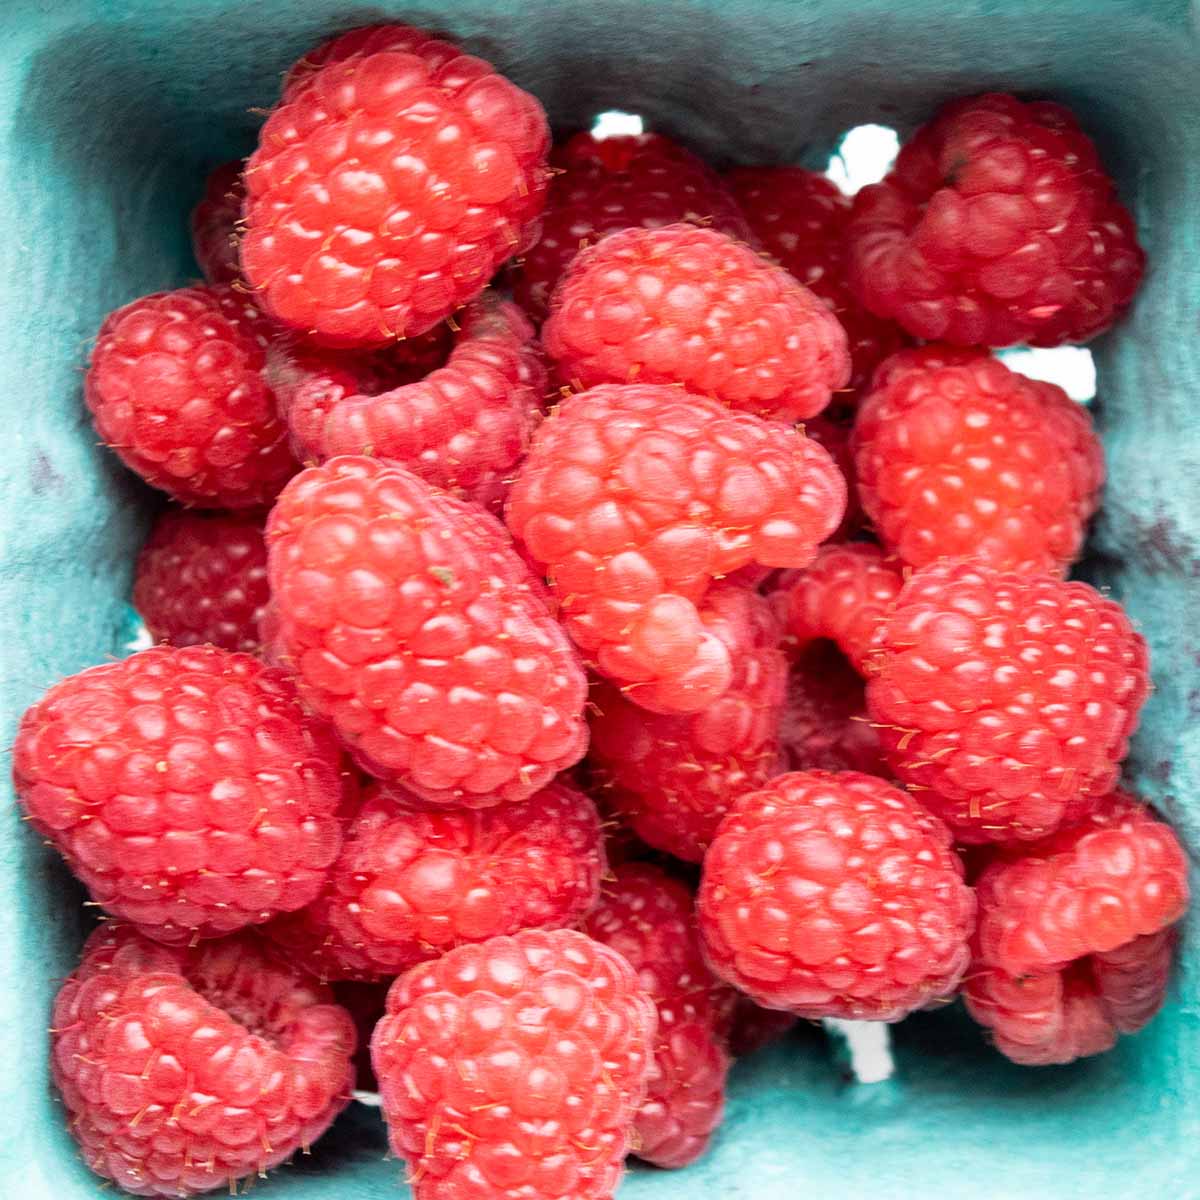 Raspberries in a container